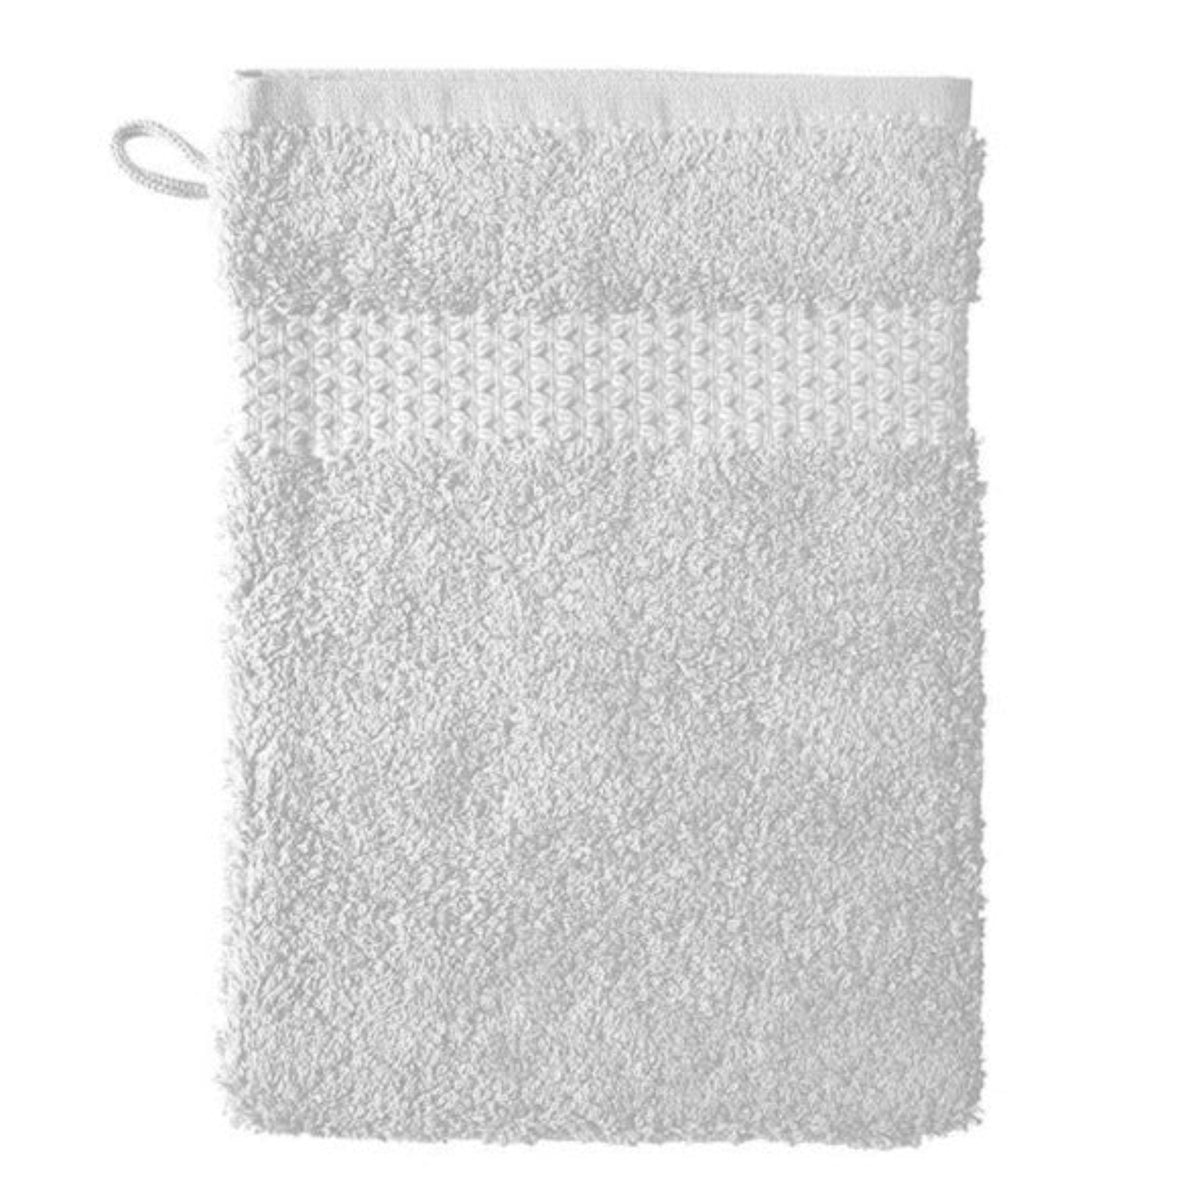 Bath Mitt of Yves Delorme Etoile Bath Collection in Silver Color